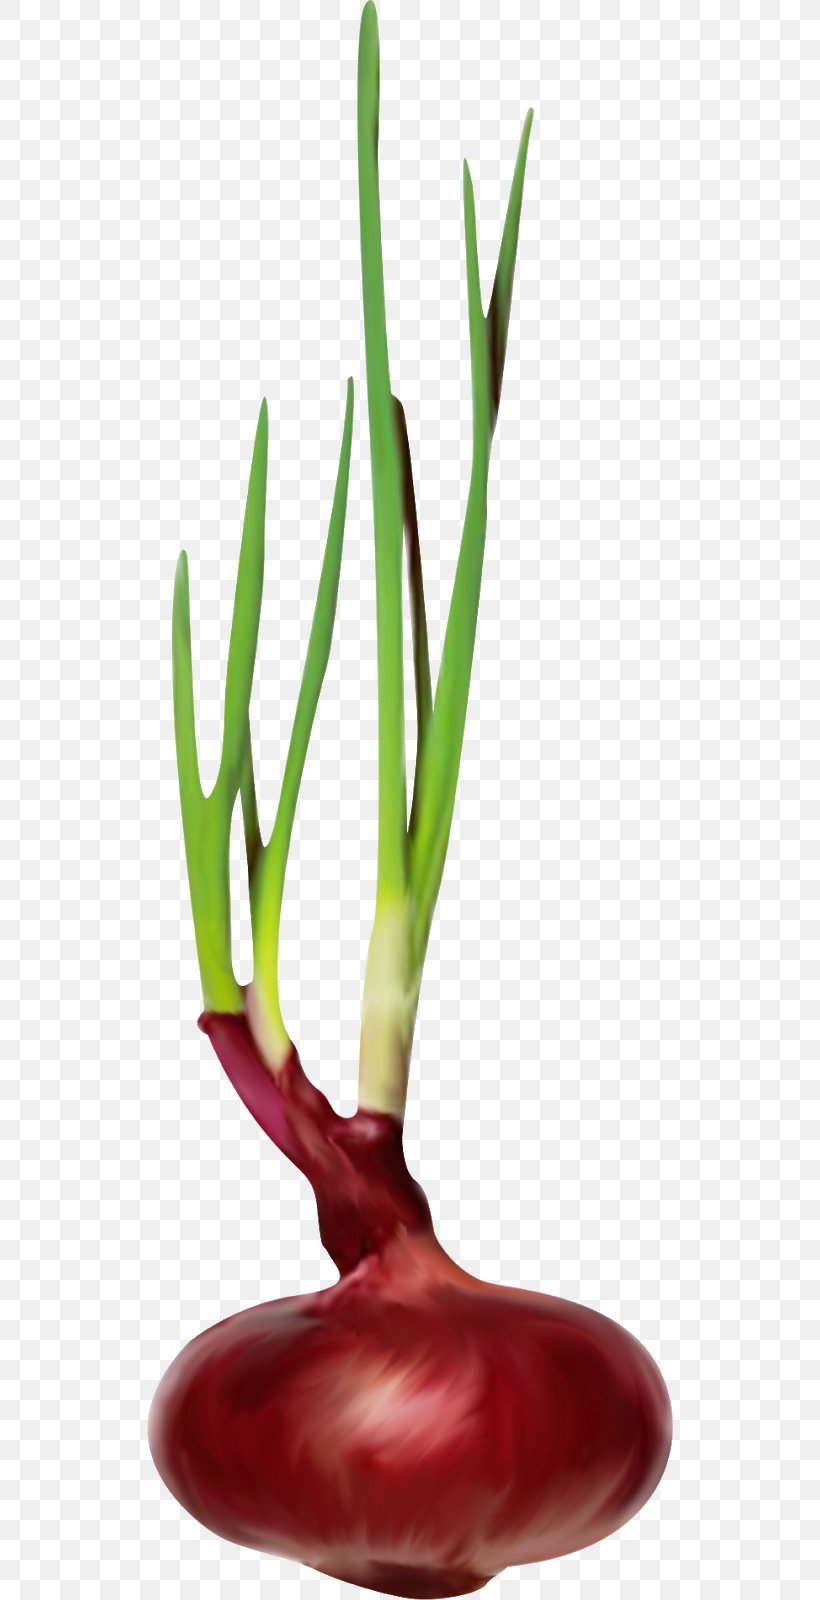 Welsh Onion Vegetable Scallion Green, PNG, 526x1600px, Onion, Allium, Amaryllis Family, Bulb, Chives Download Free